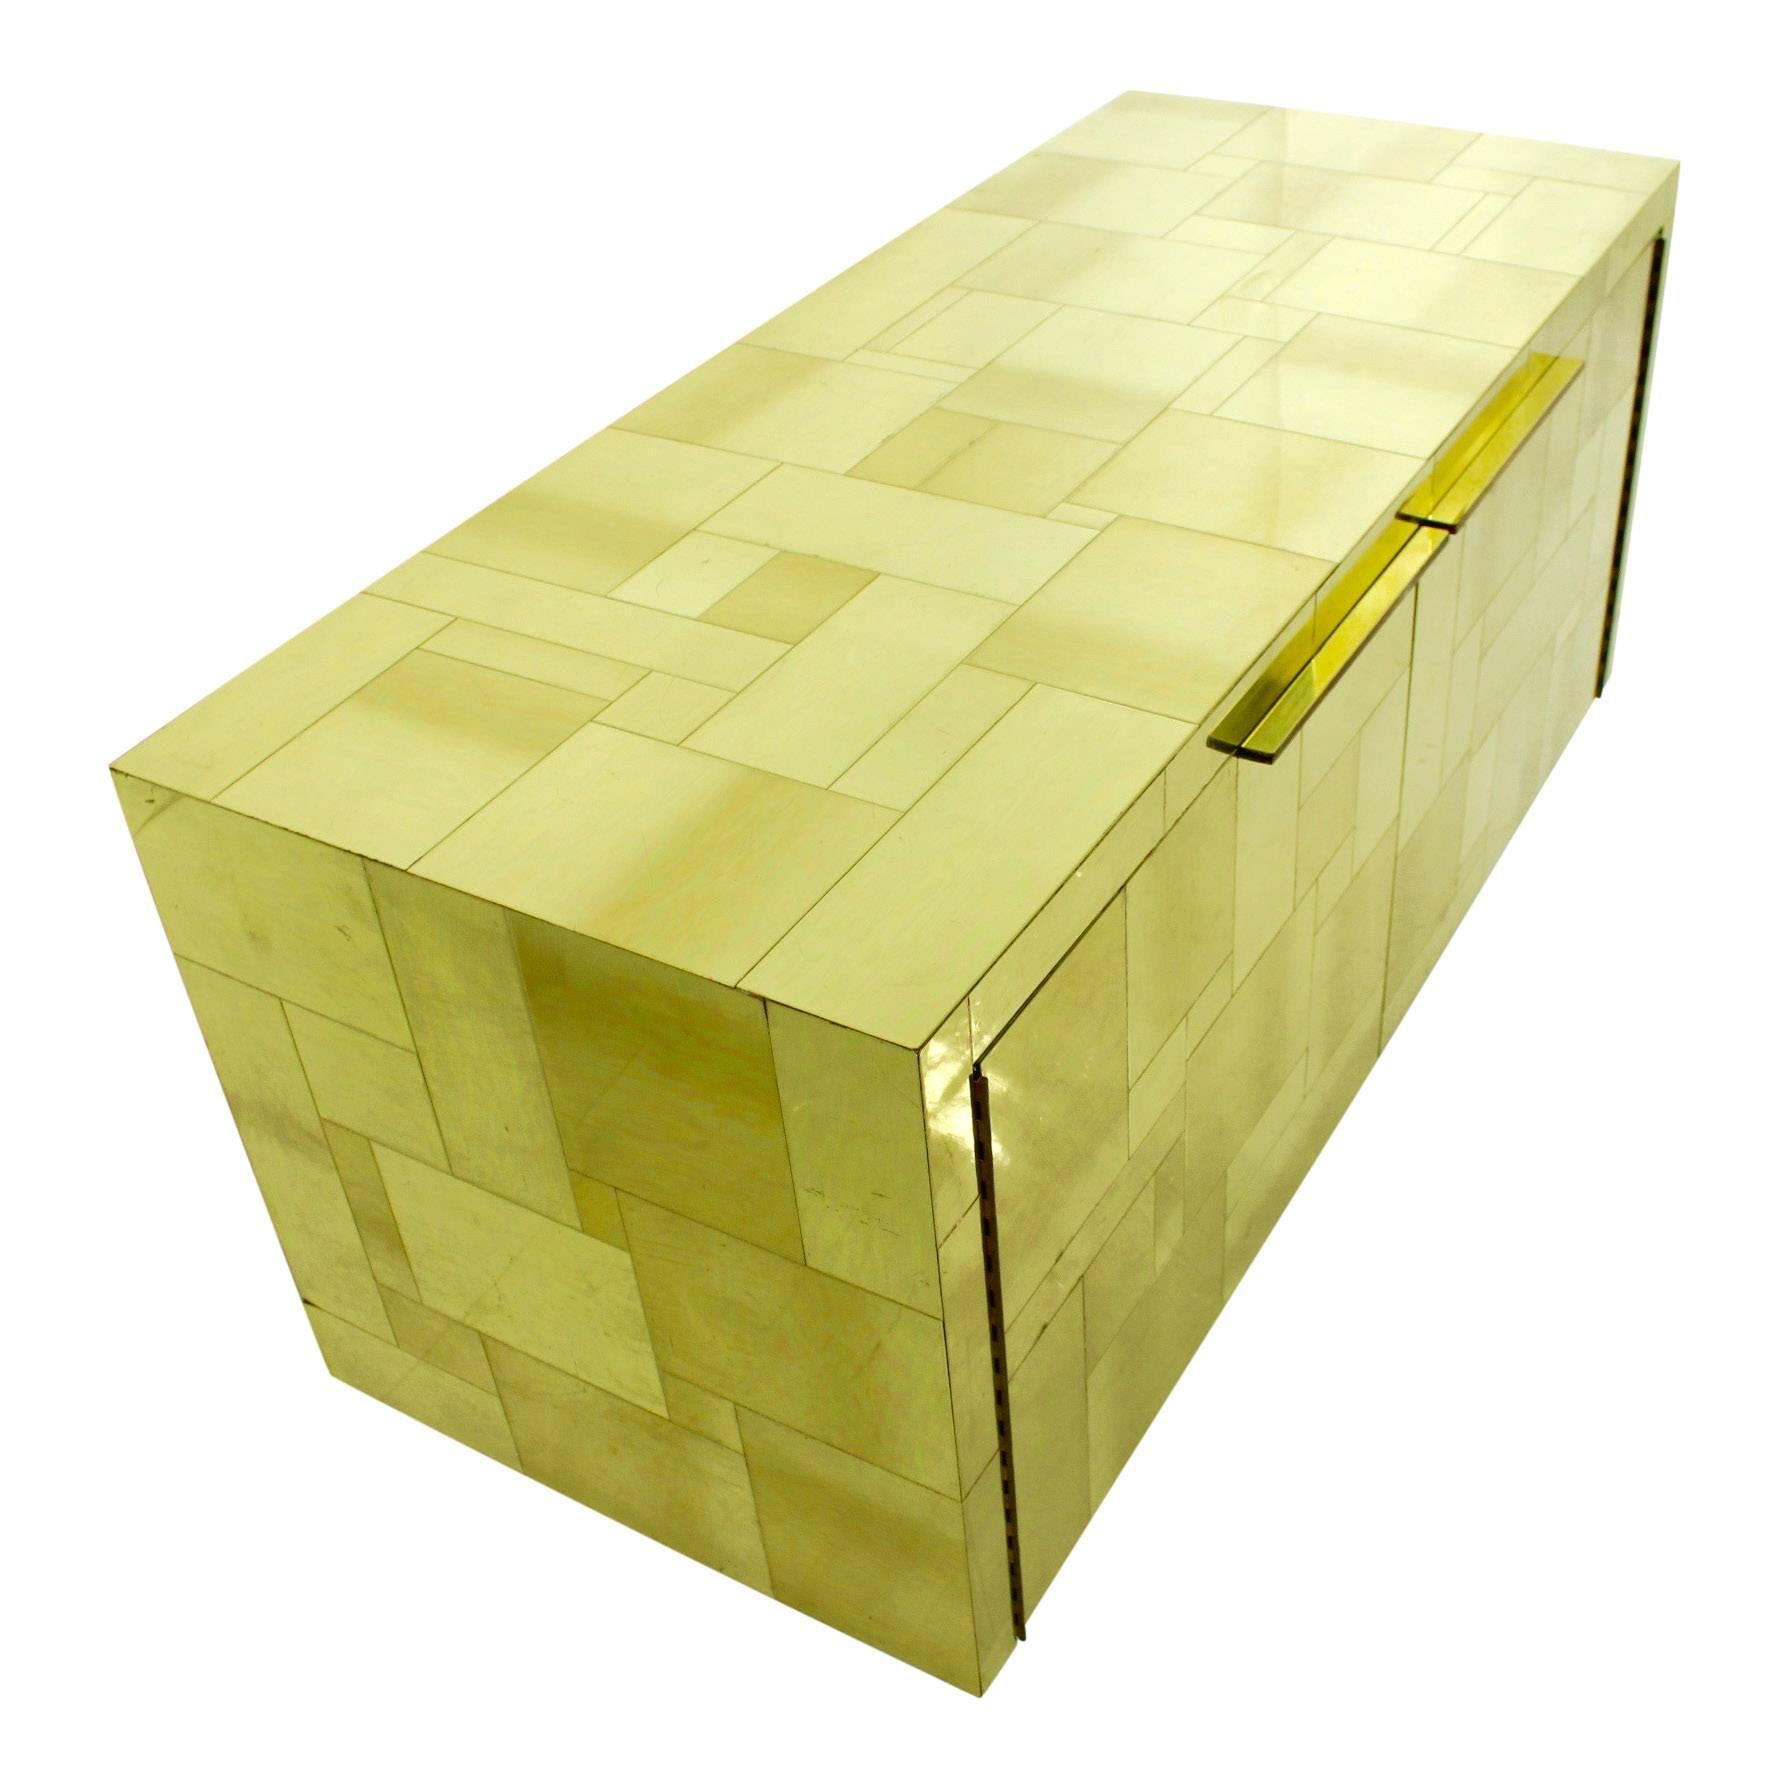 Offered for your consideration is a striking piece of 1970s design a Paul Evans cityscape wall hanging cabinet or credenza for Directional.

Inspired by the shimmering skyline of New York city, where many of these pieces found their home, the